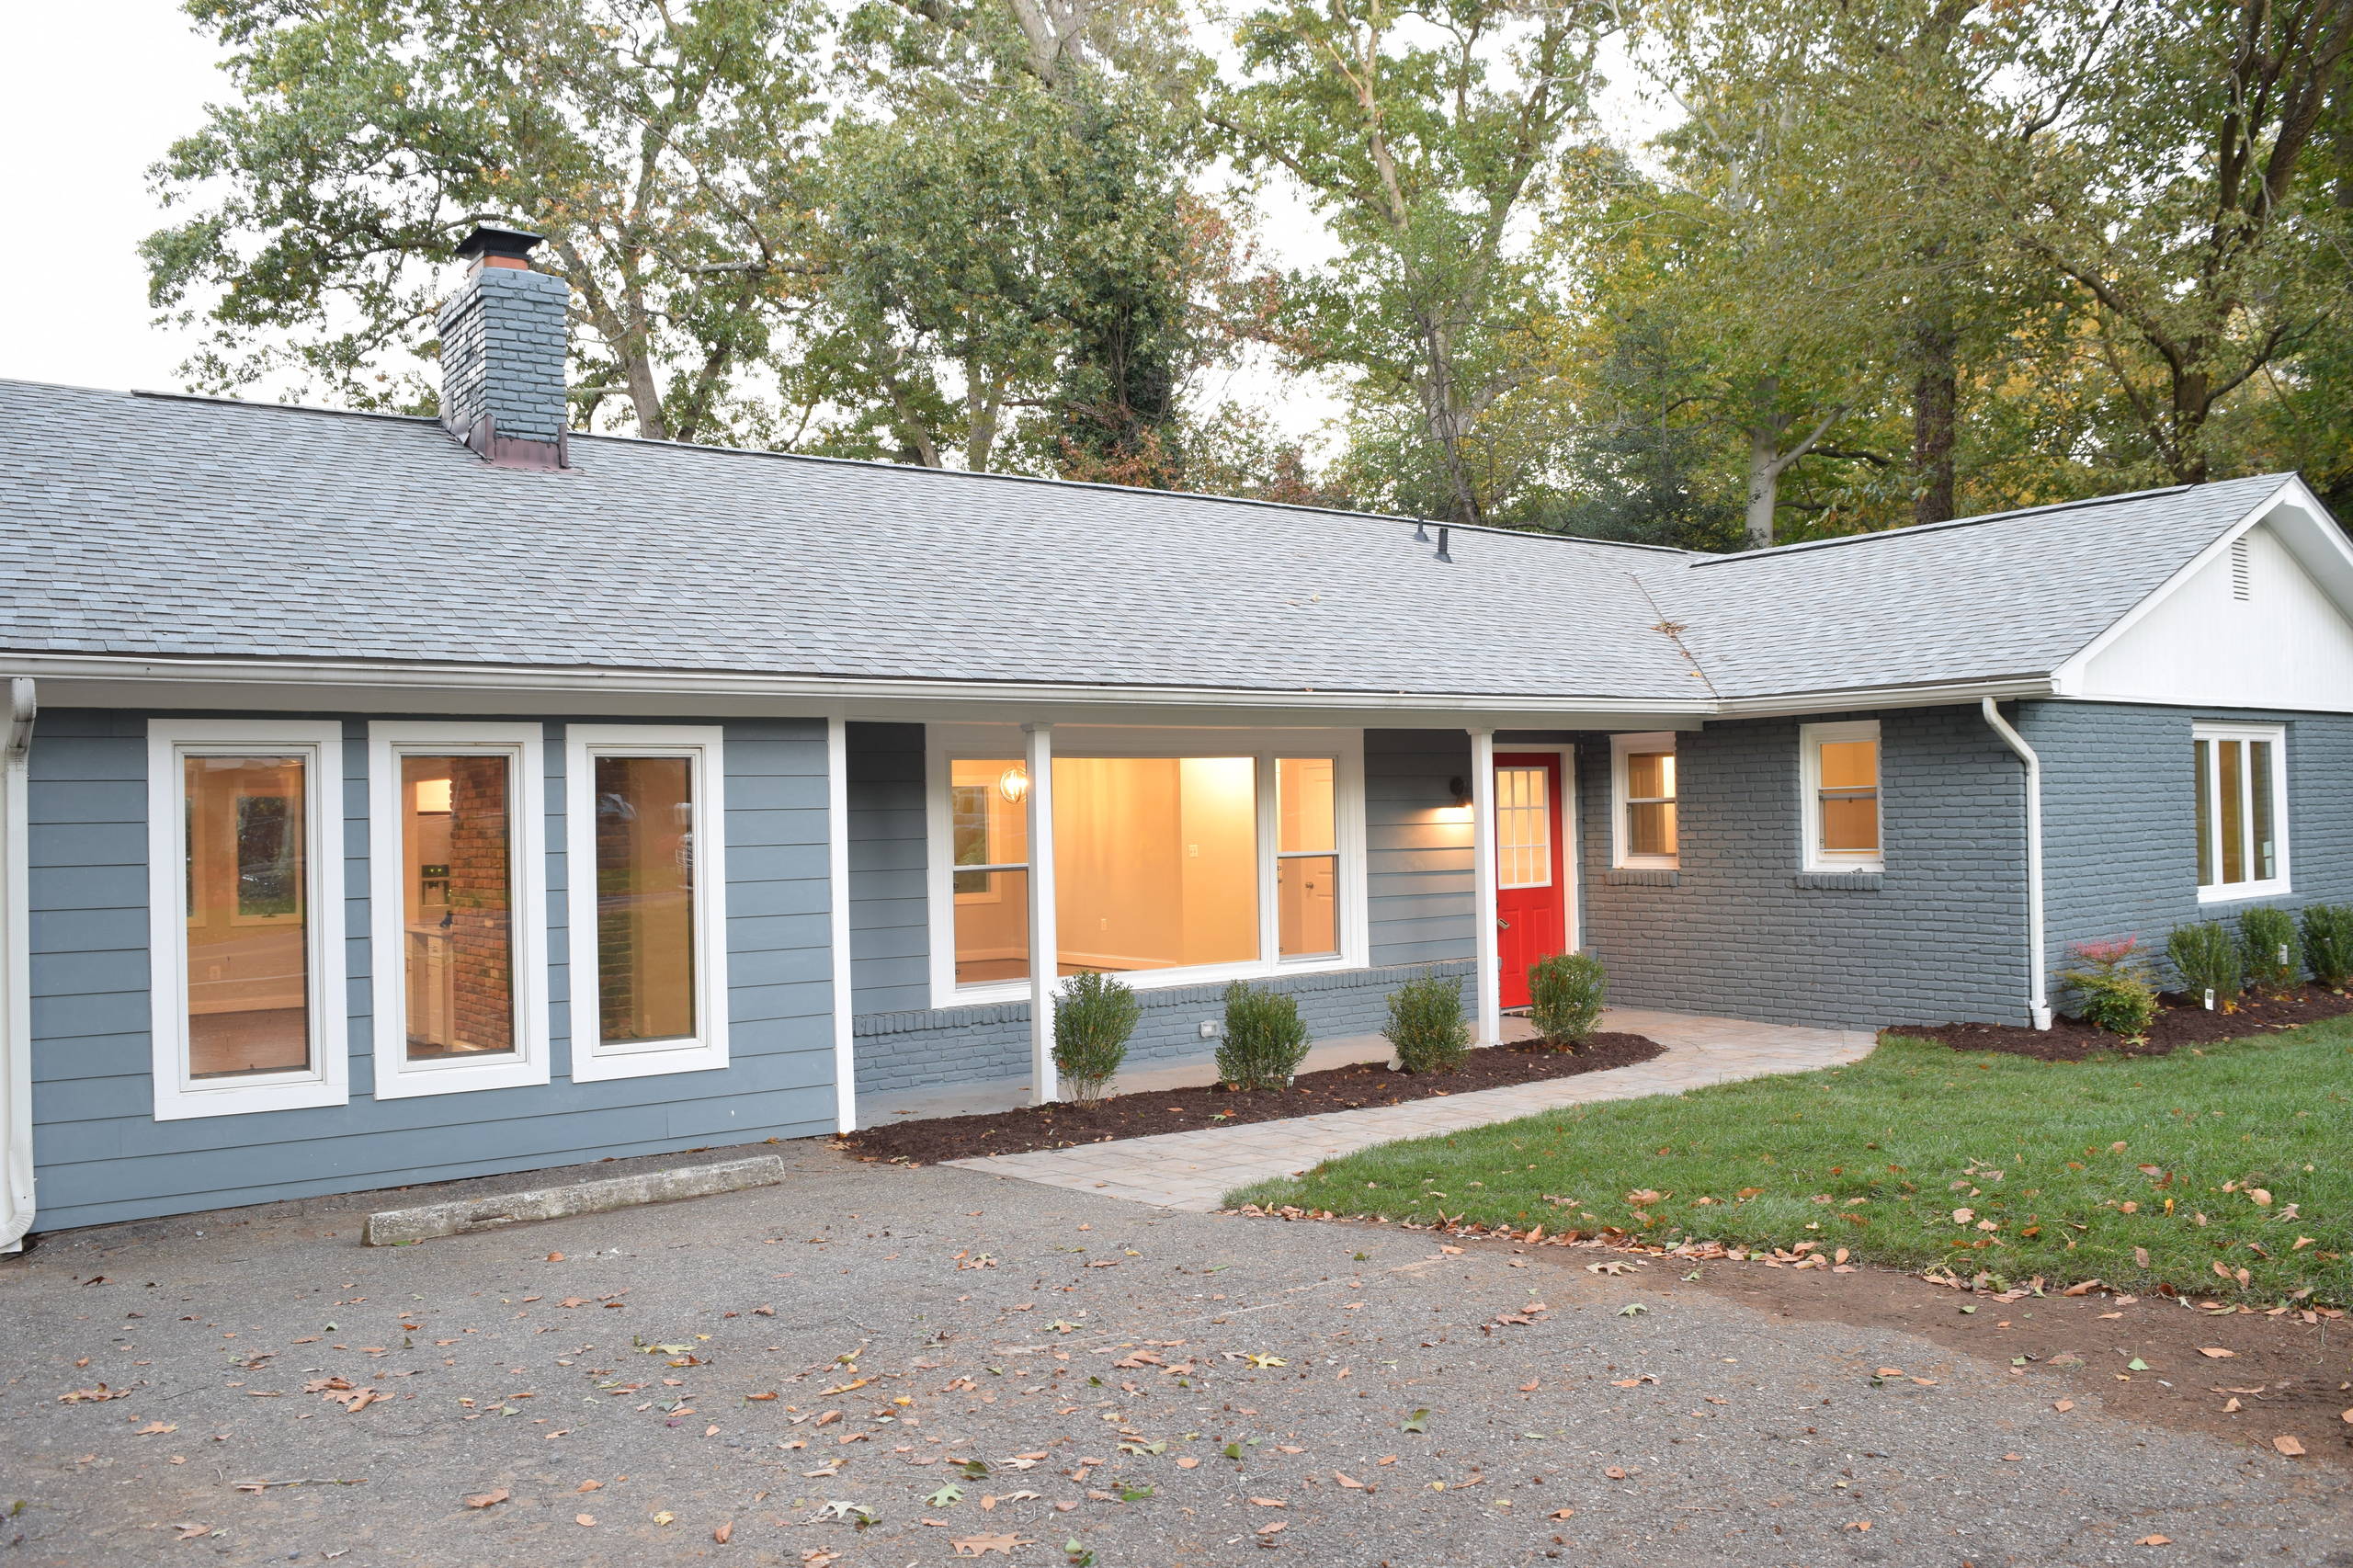 Annapolis Exterior siding and roof